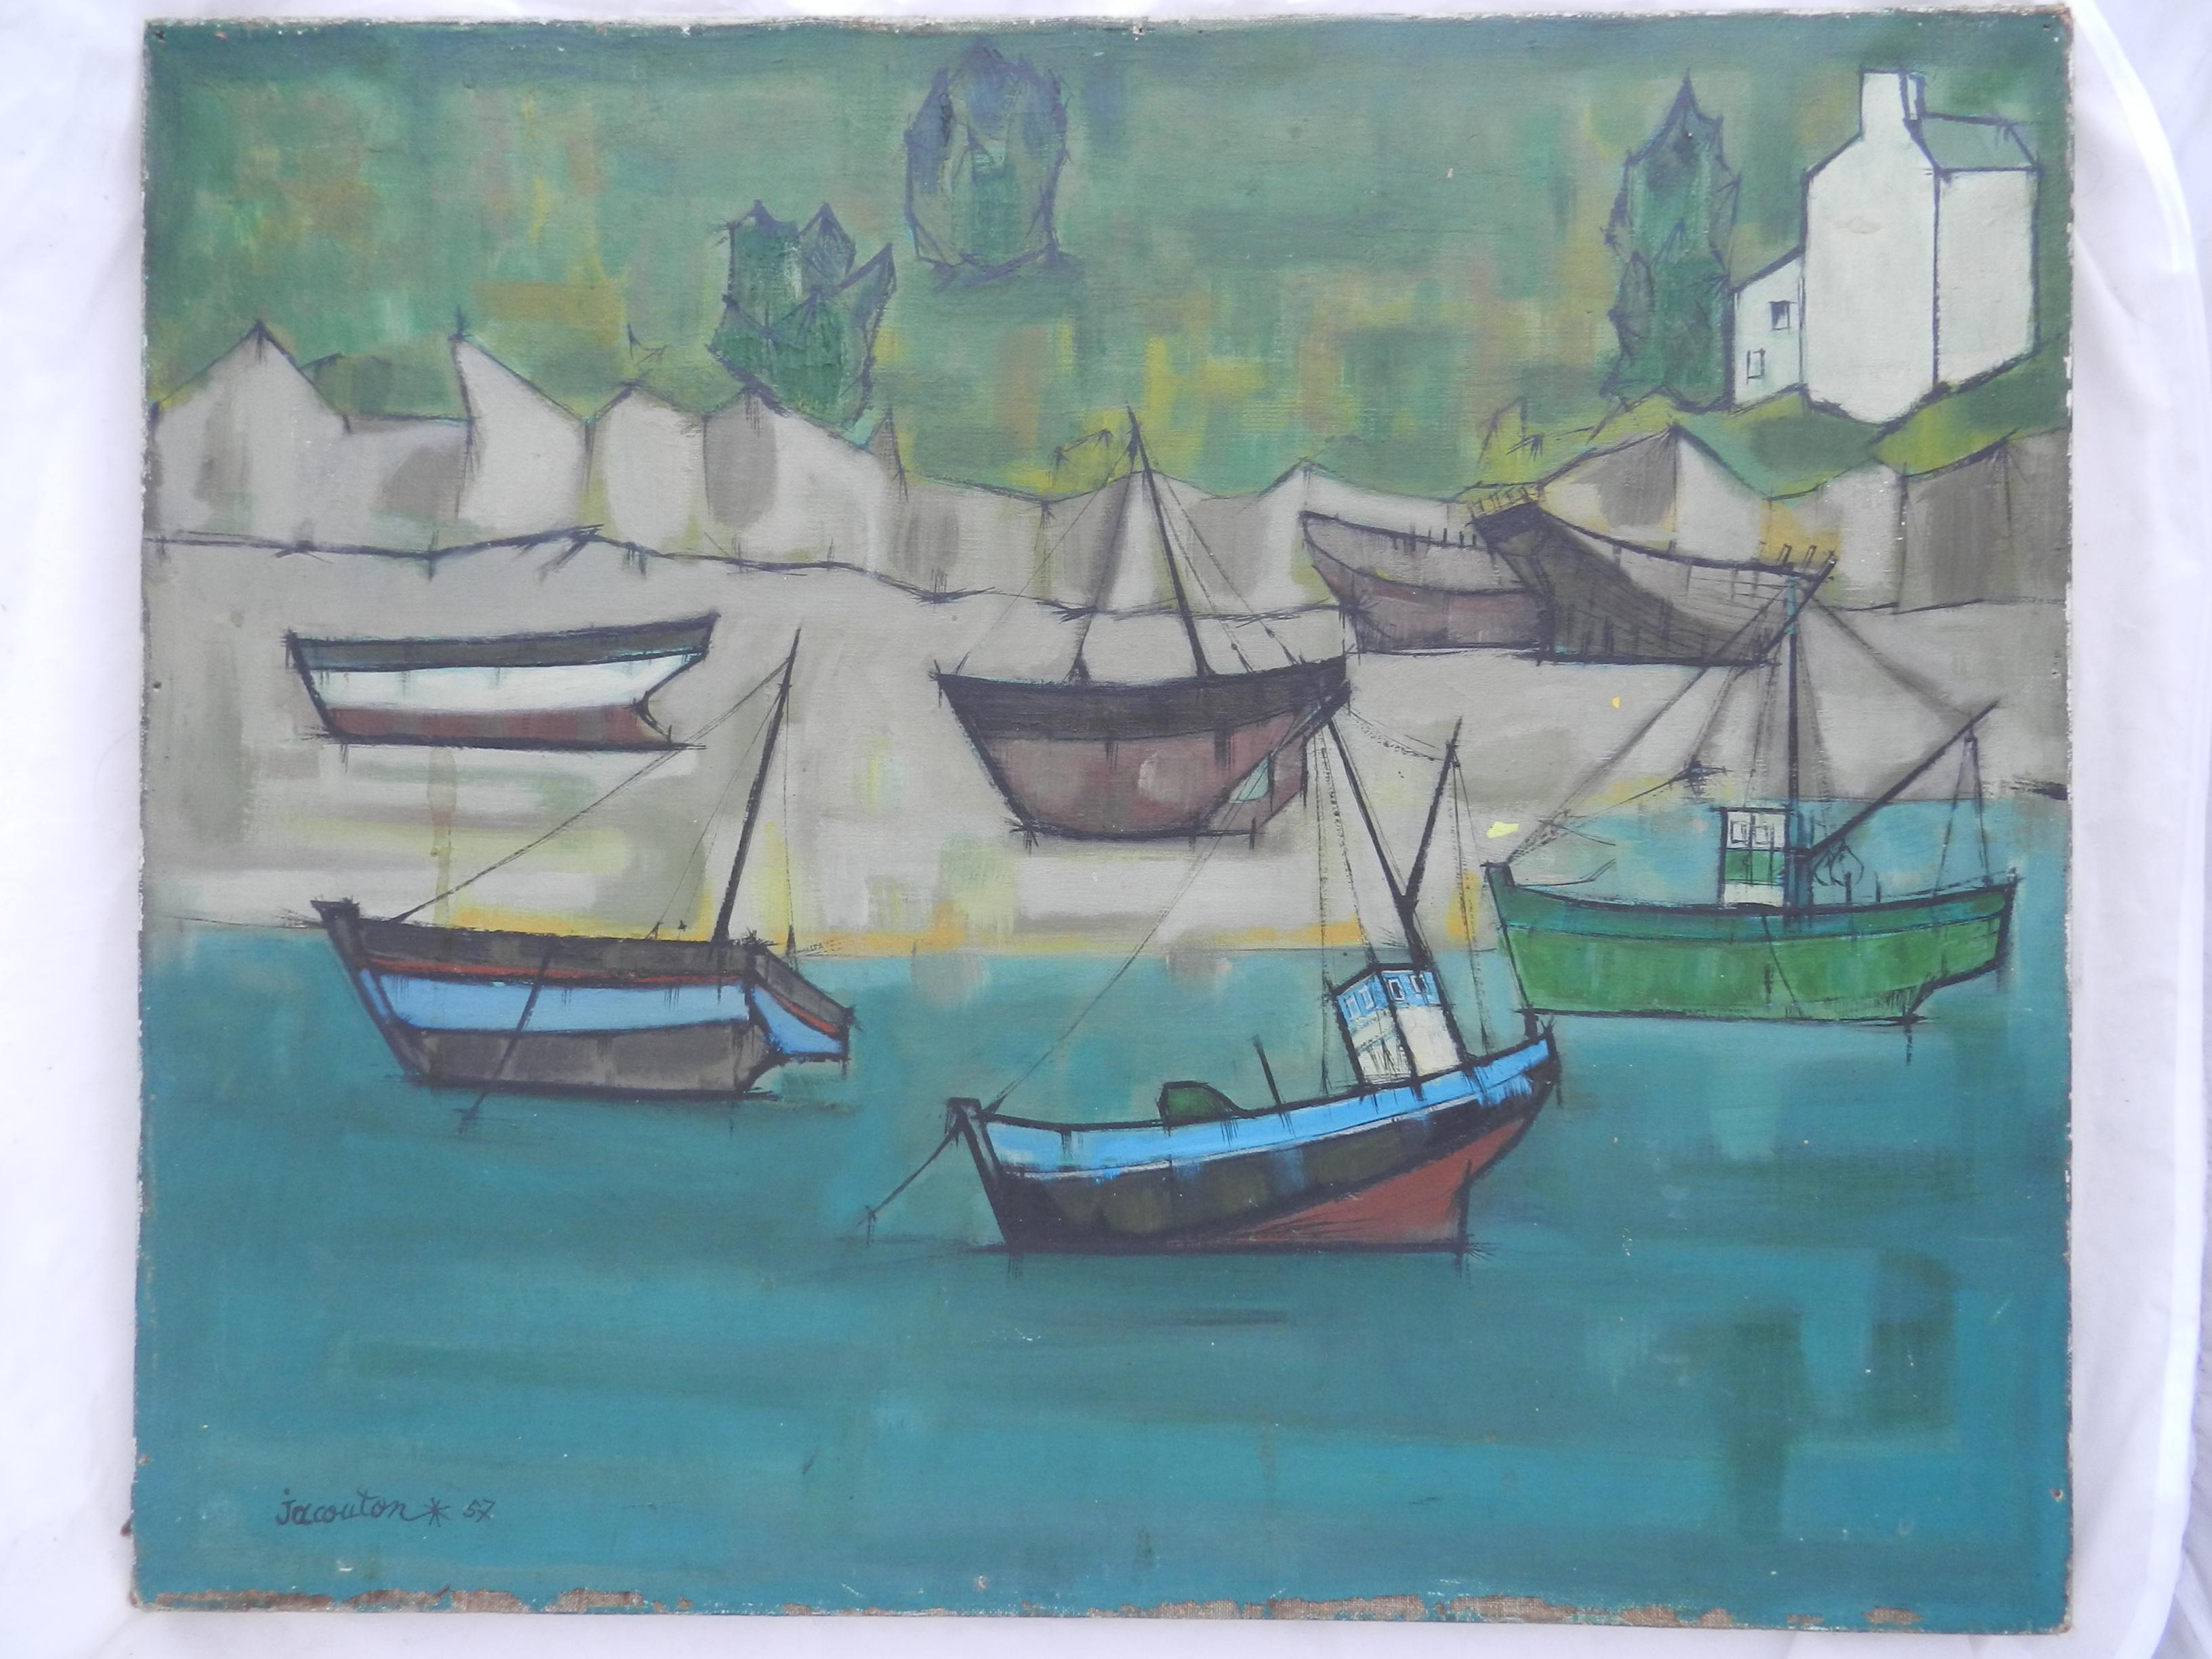 Boats at St Jean de Luz France by Jacouton Mid Century c1957 - Other Art Style Painting by Unknown